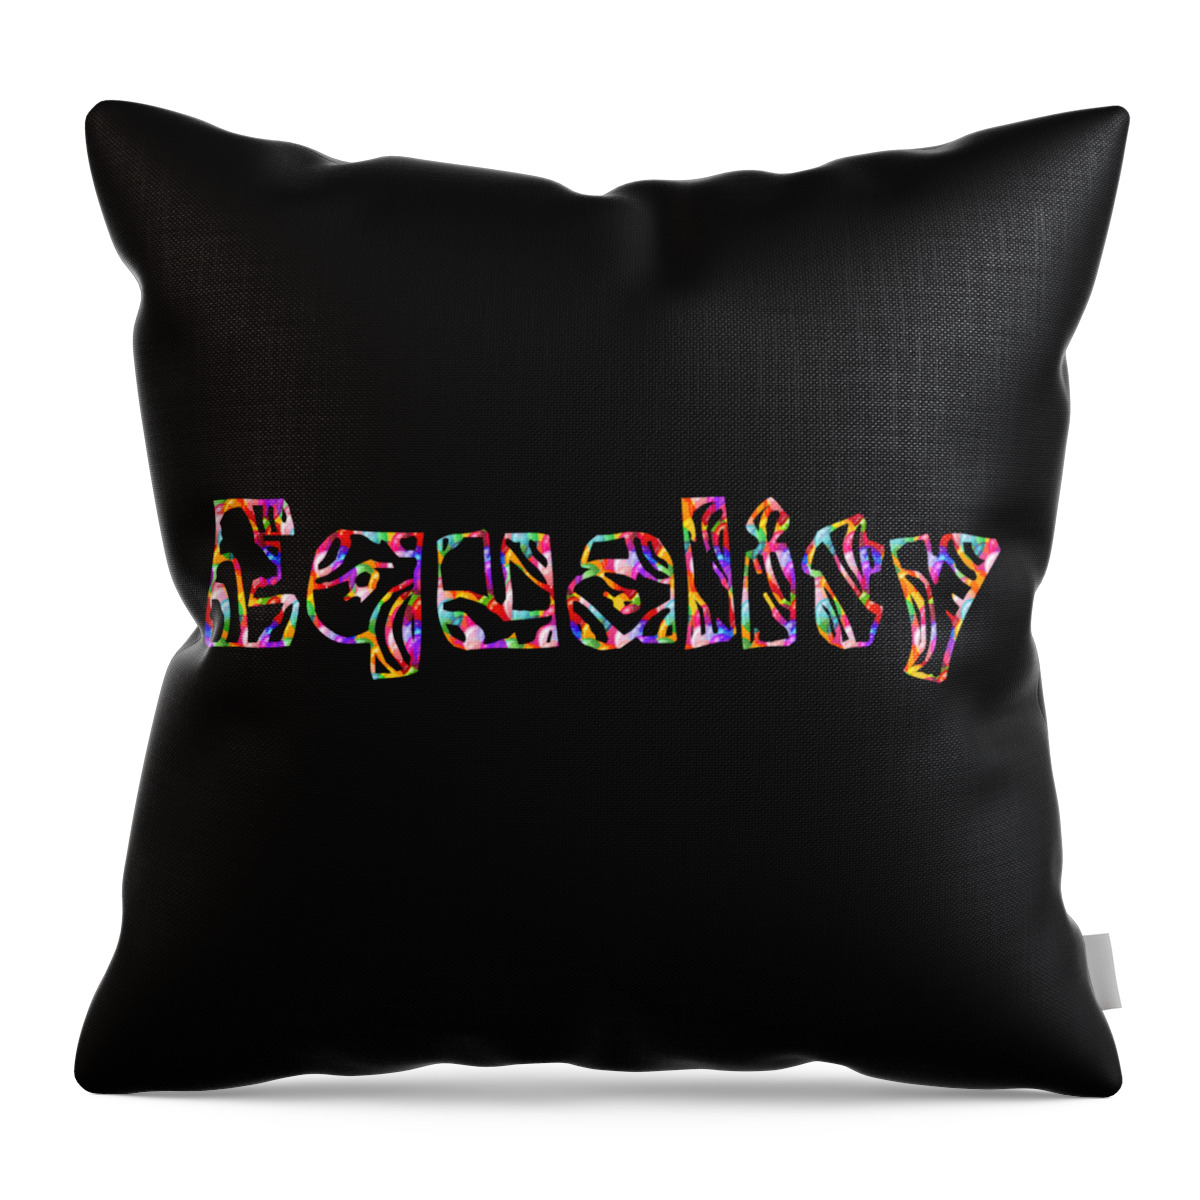 Equality Throw Pillow featuring the digital art Equality by Rachel Hannah